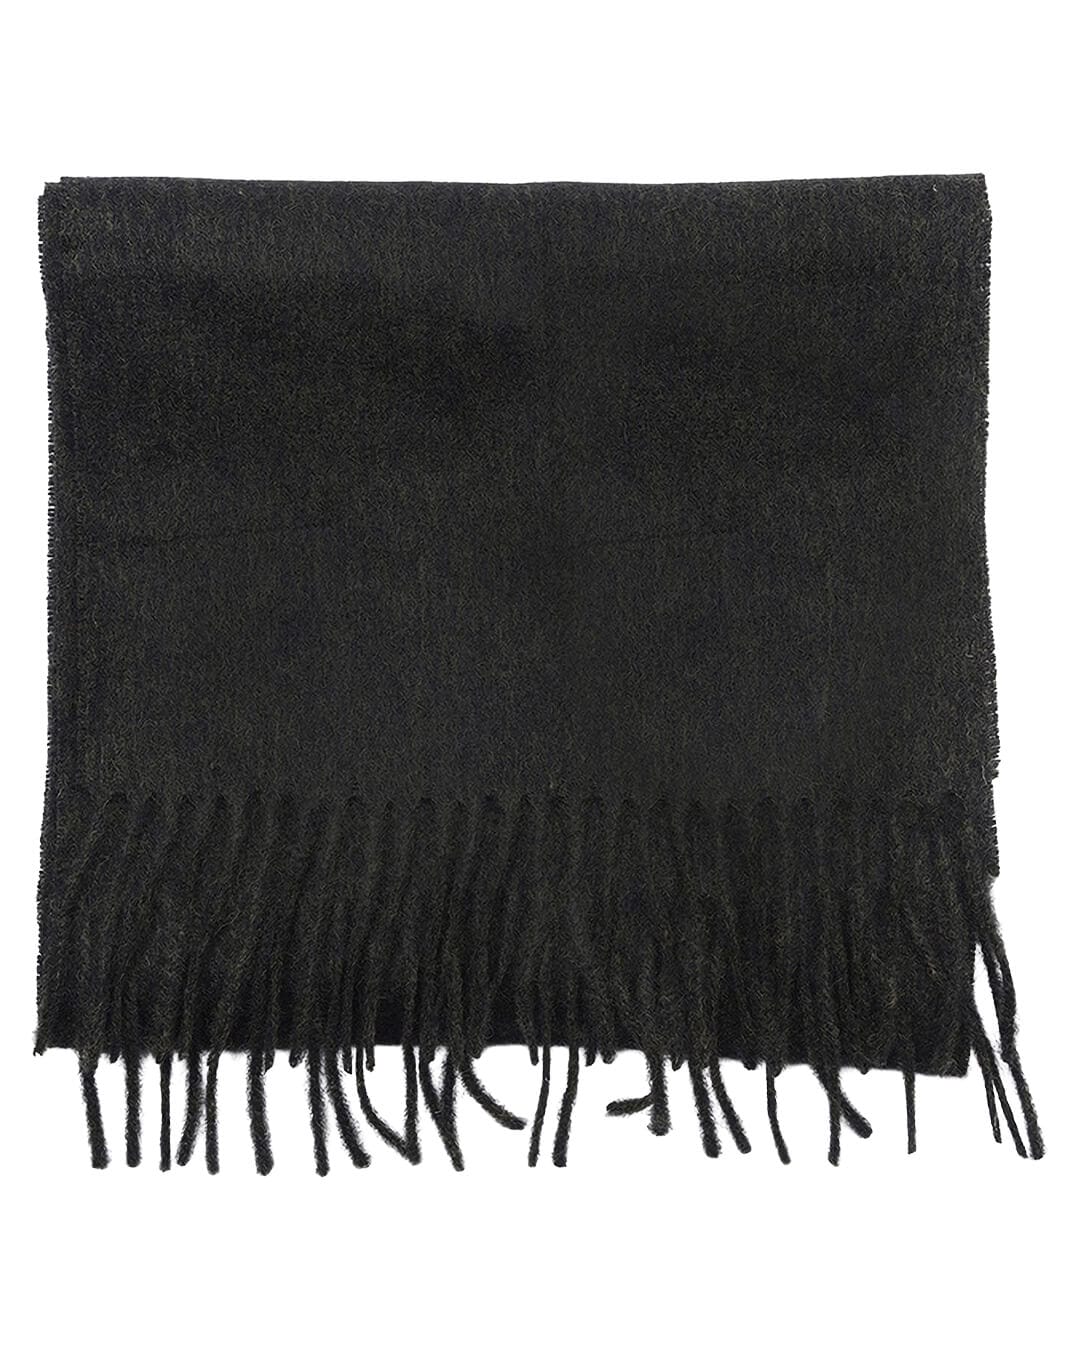 Barbour Scarves ONE SIZE Barbour Black Plain Lambswool Scarf